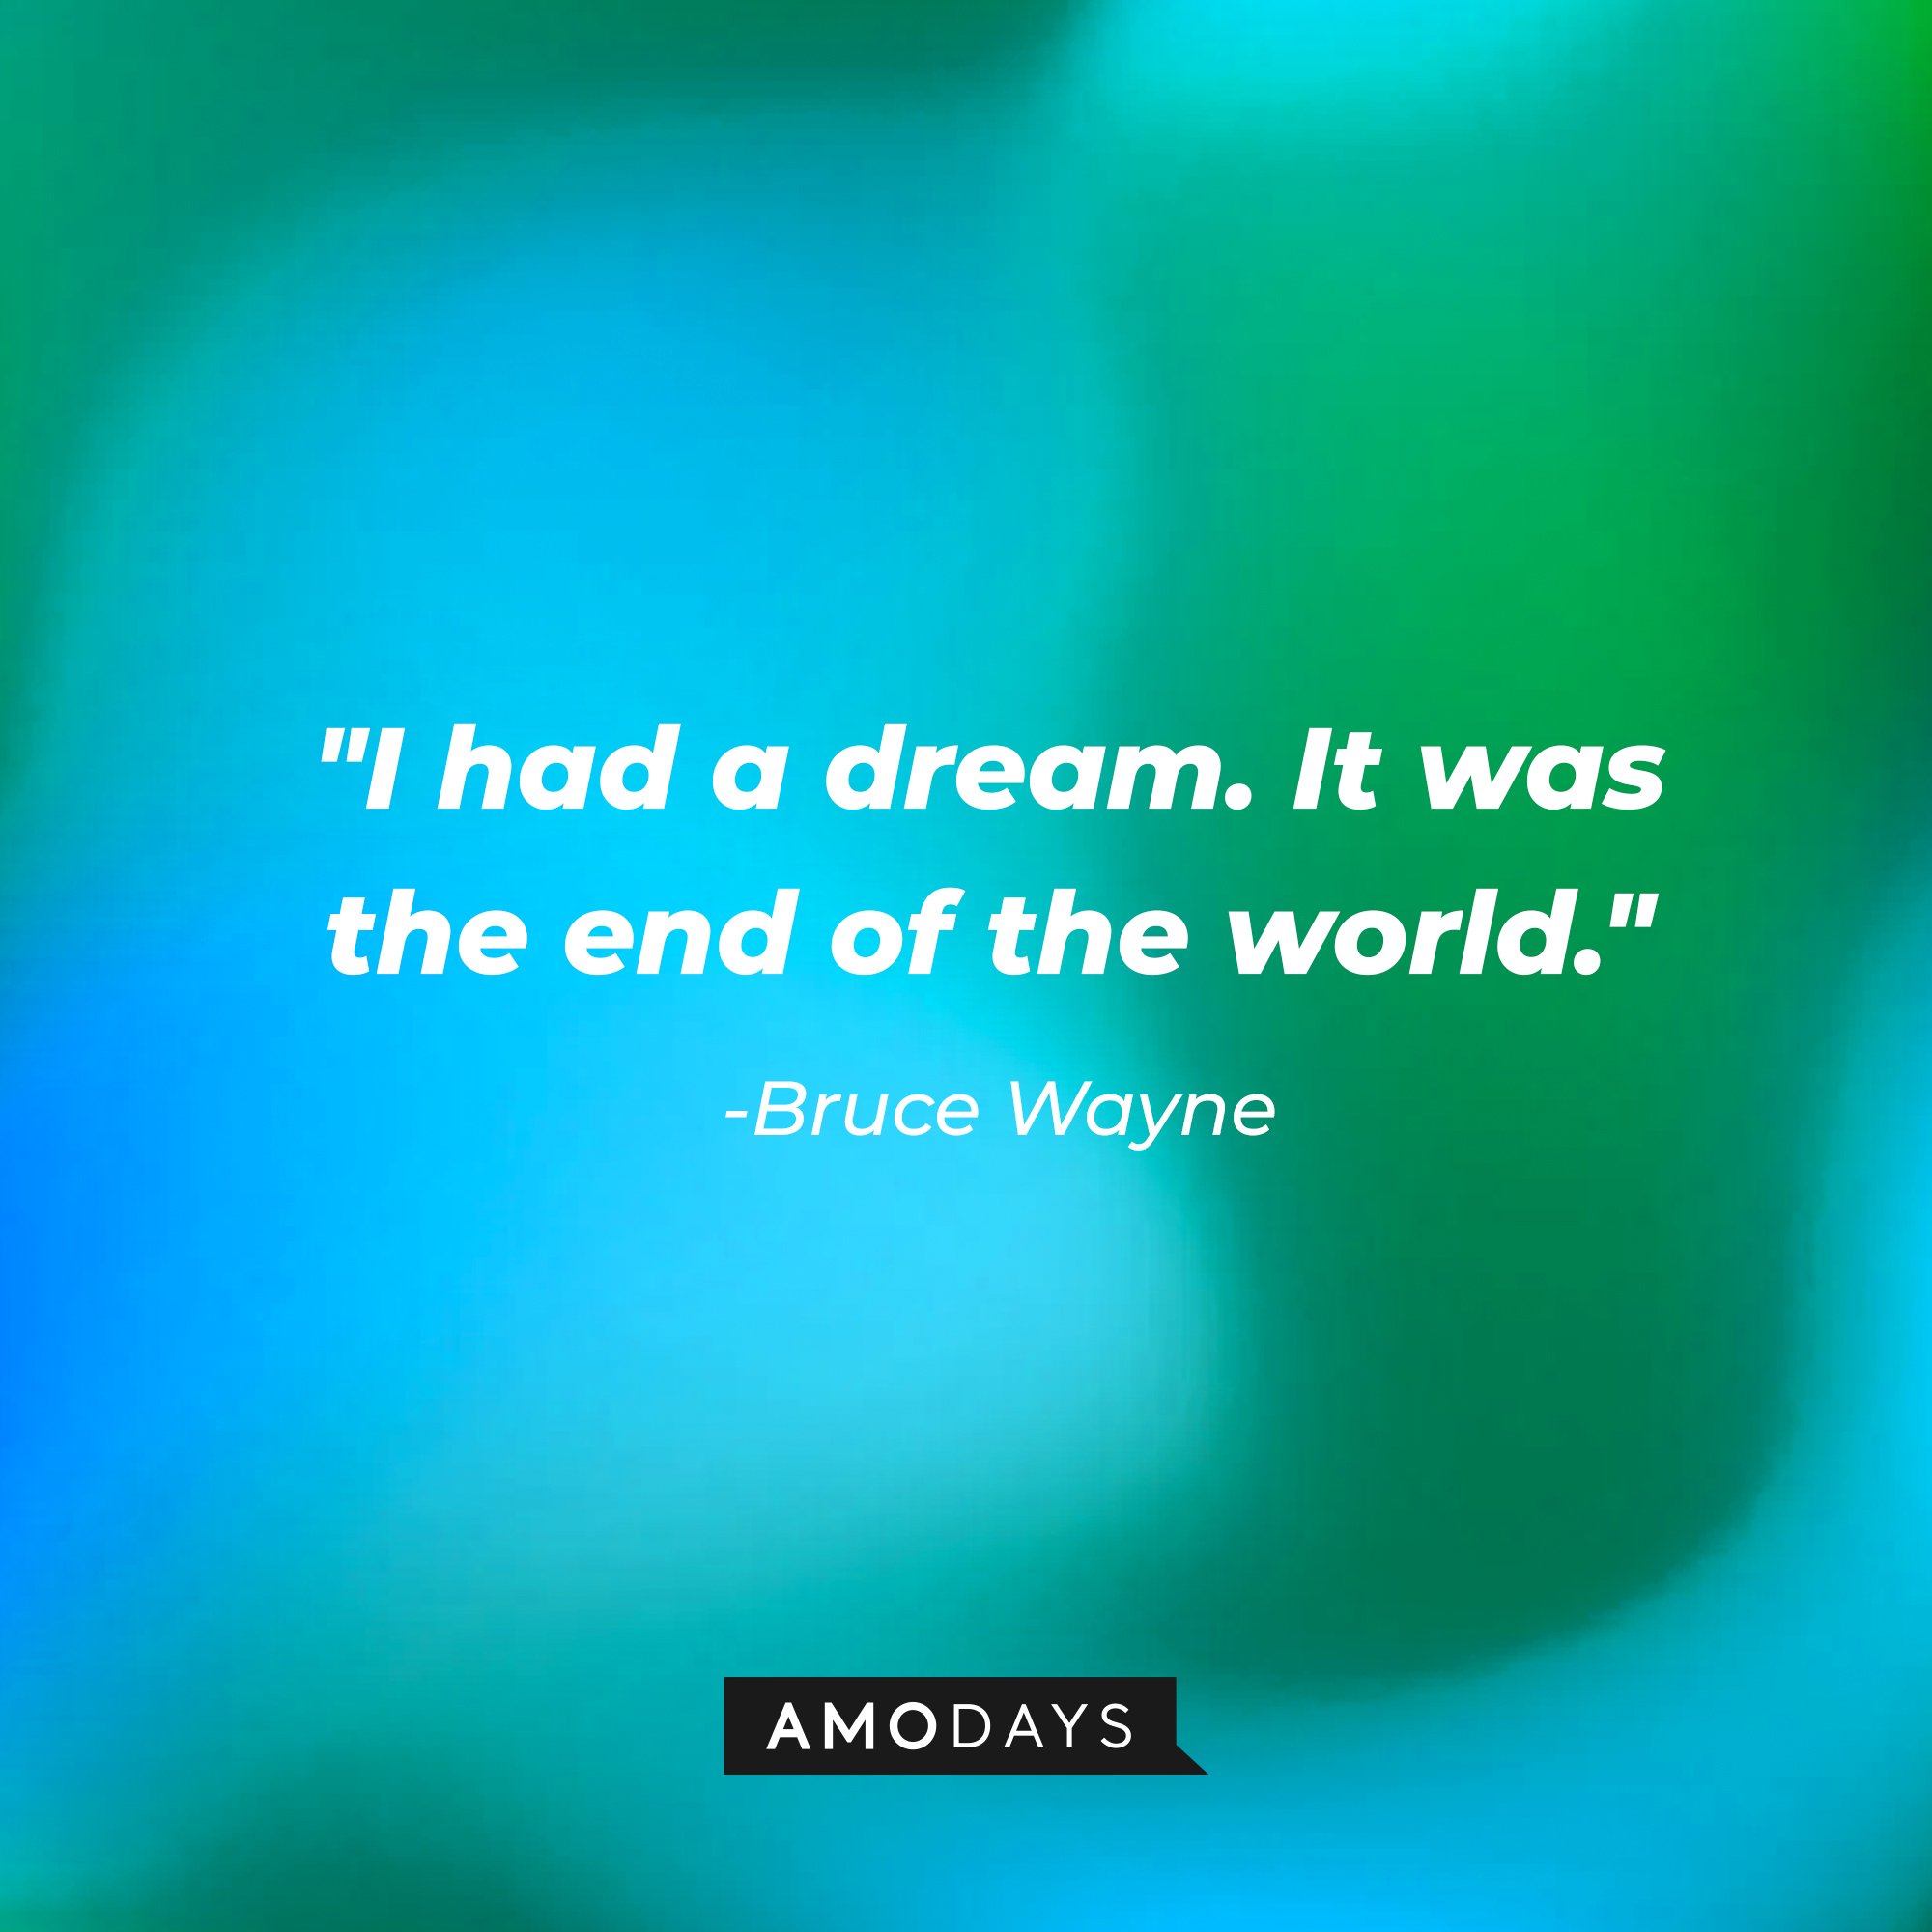 Bruce Wayne's quote, "I had a dream. It was the end of the world." | Source: AmoDays